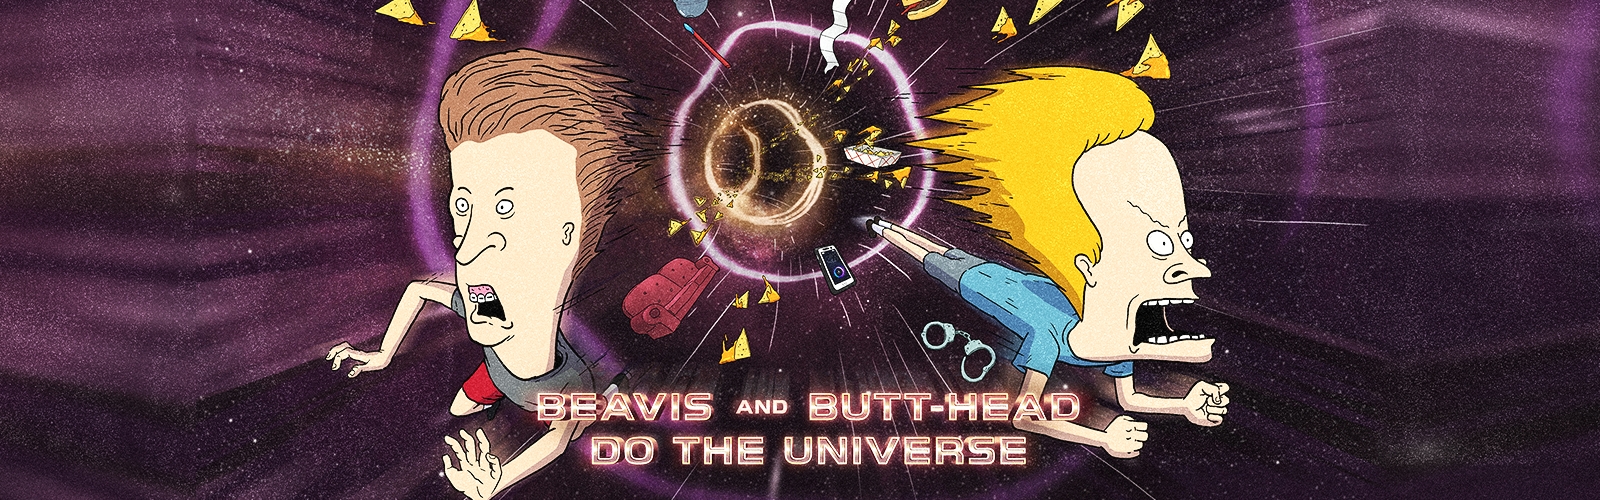 download beavis and butthead do the universe dvd